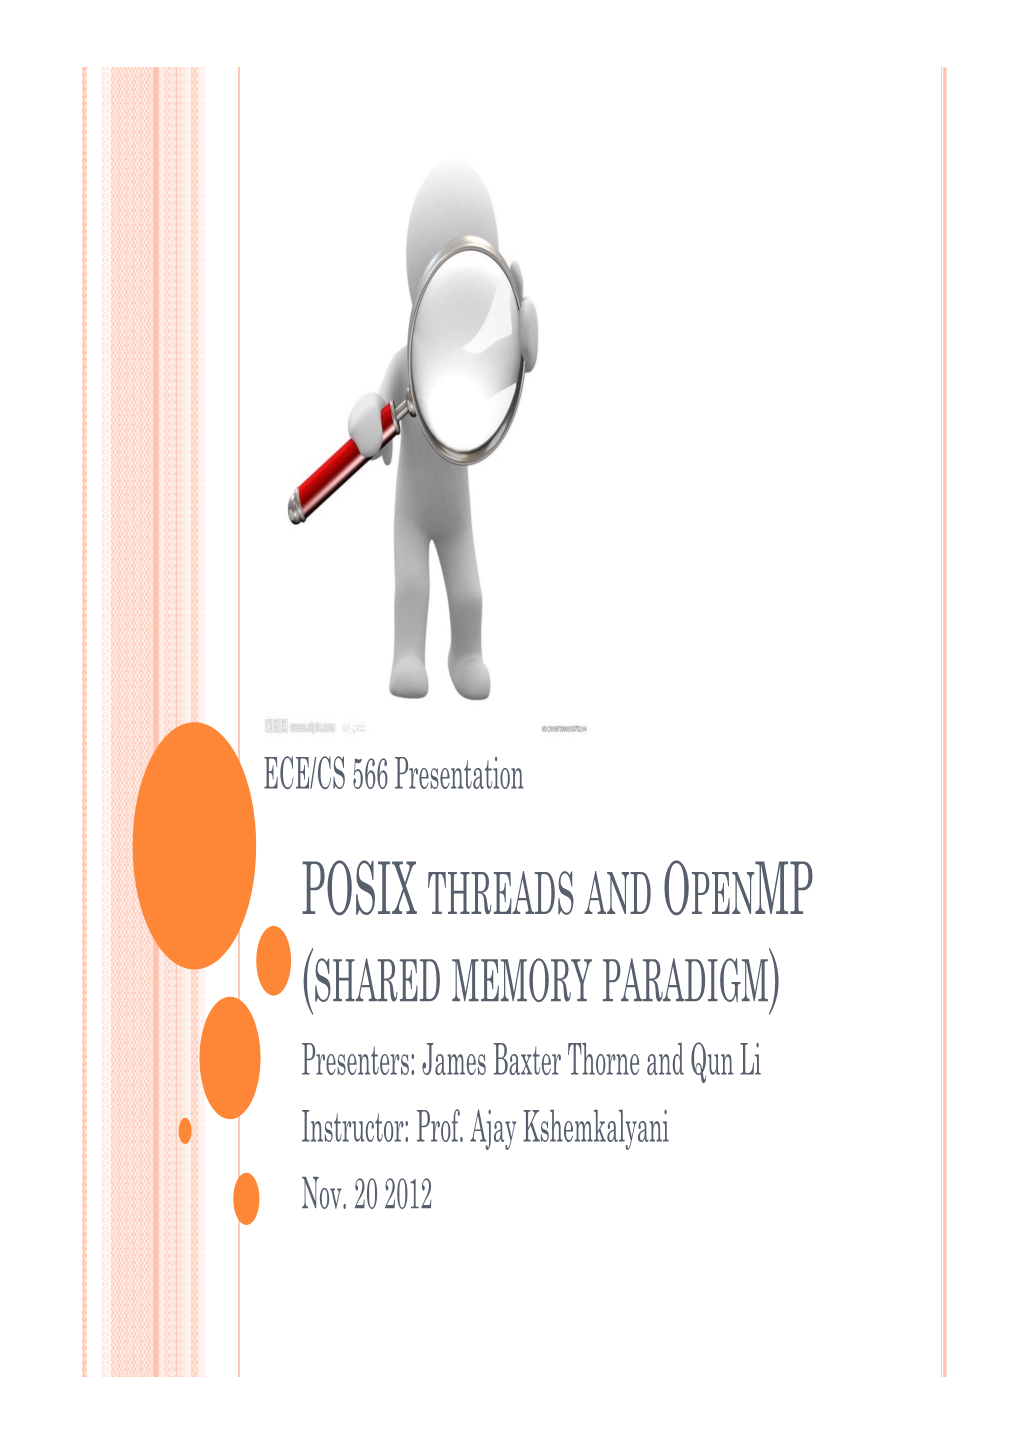 POSIX THREADS and OPENMP (SHARED MEMORY PARADIGM) Presenters: James Baxter Thorne and Qun Li Instructor: Prof